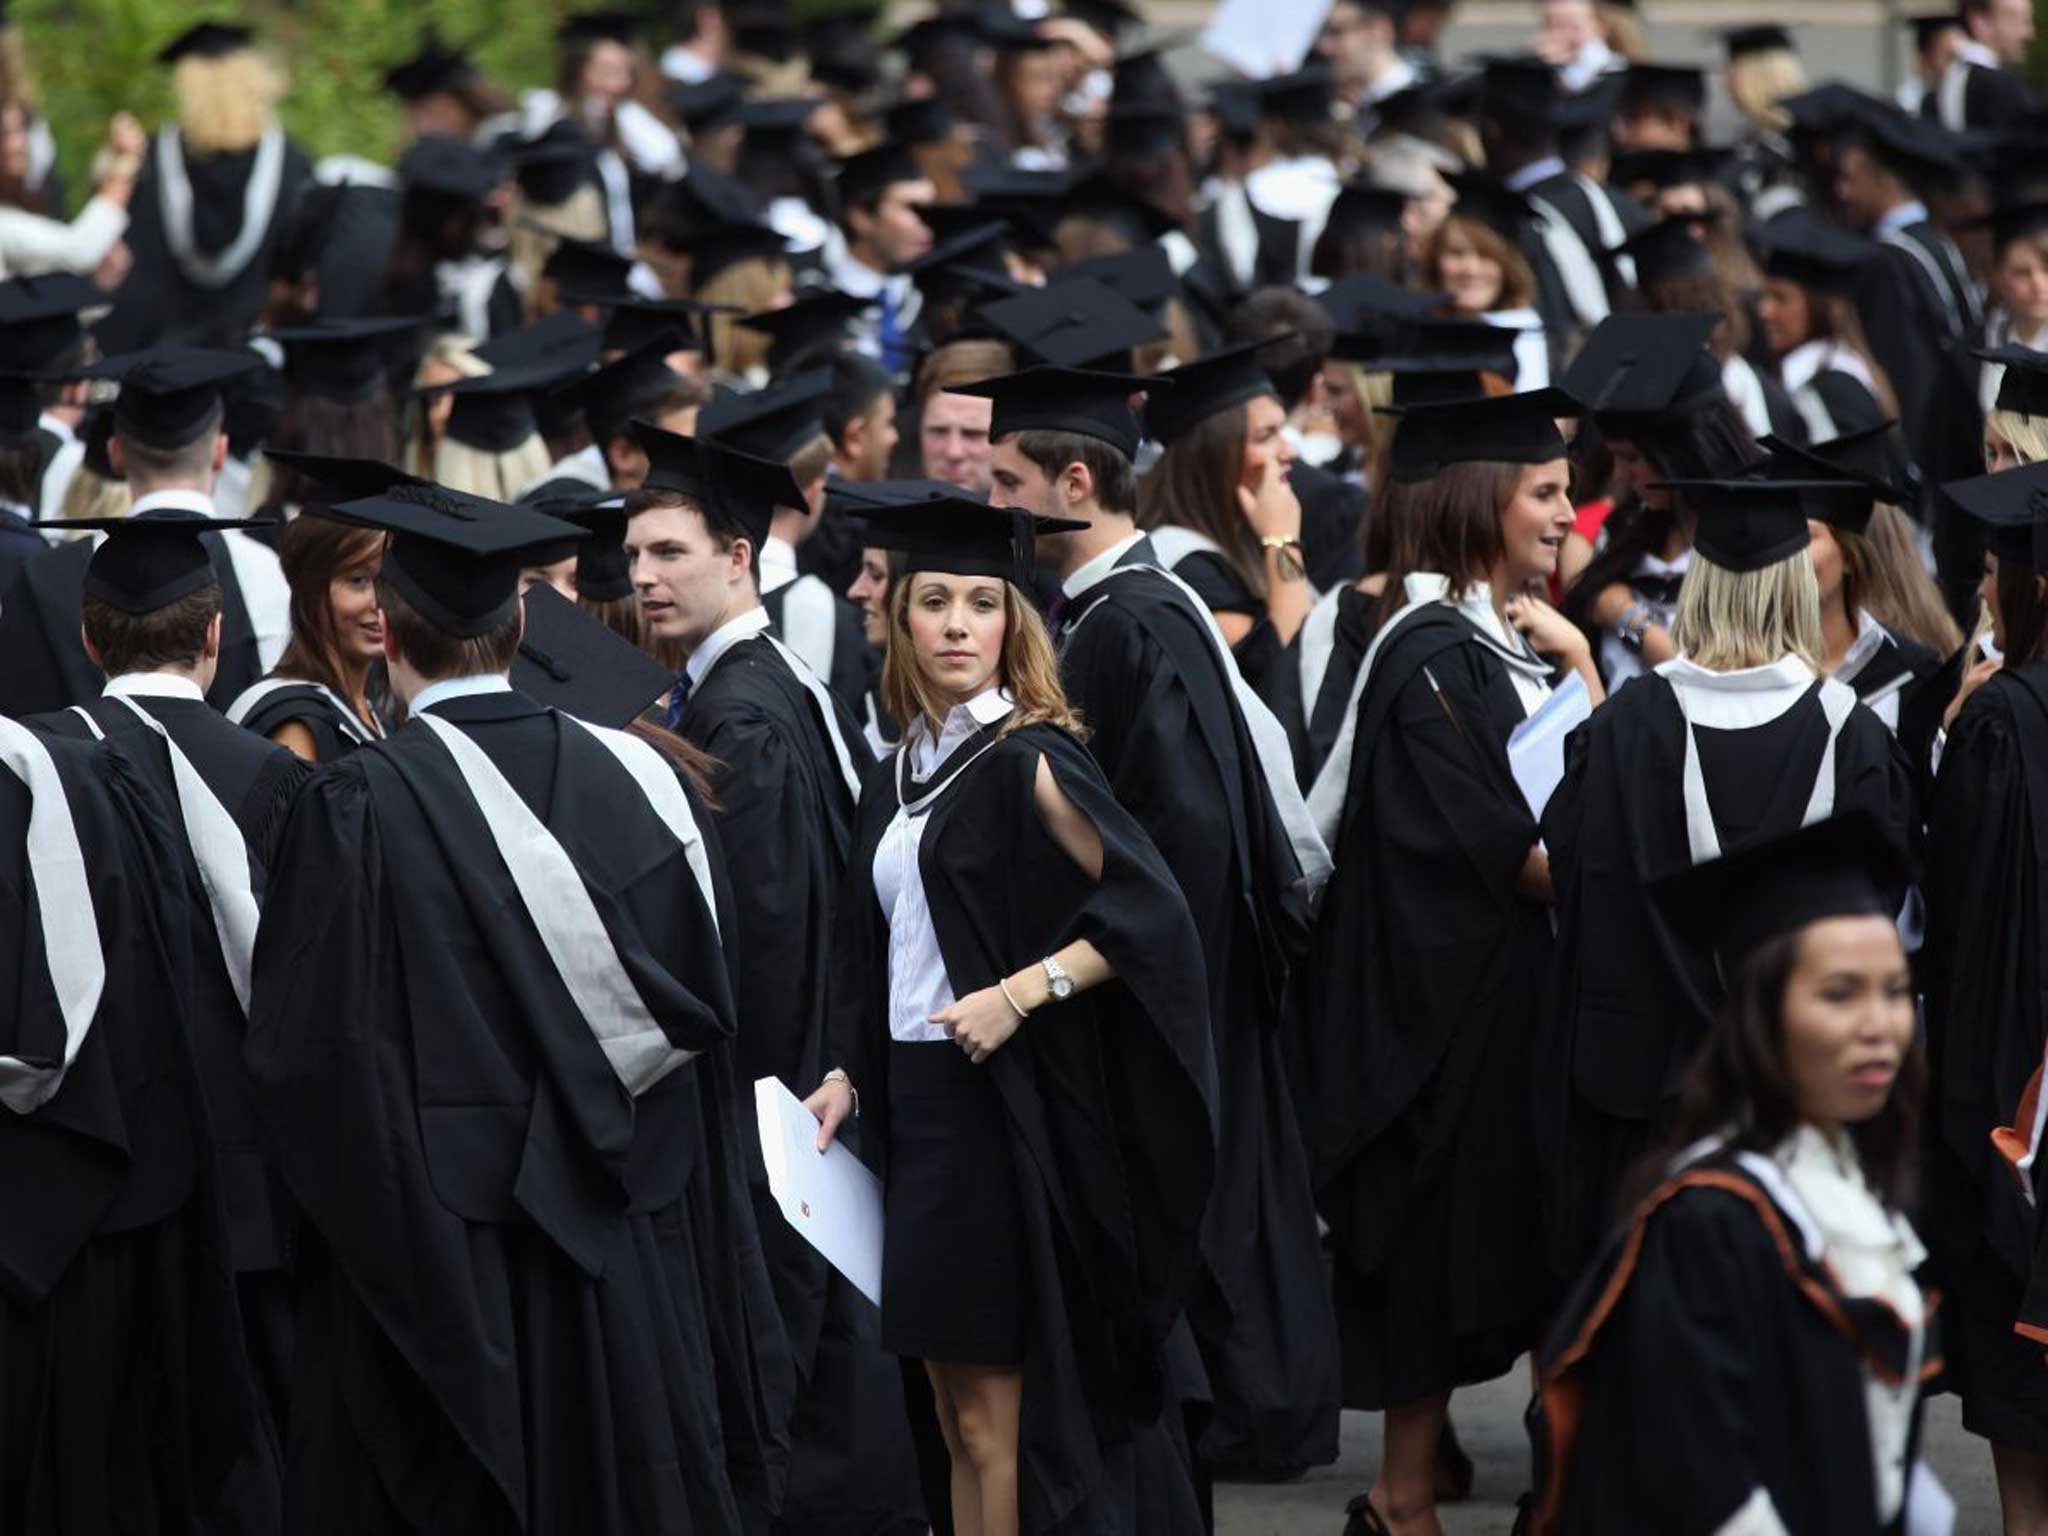 Complaints by university students reached record levels last year